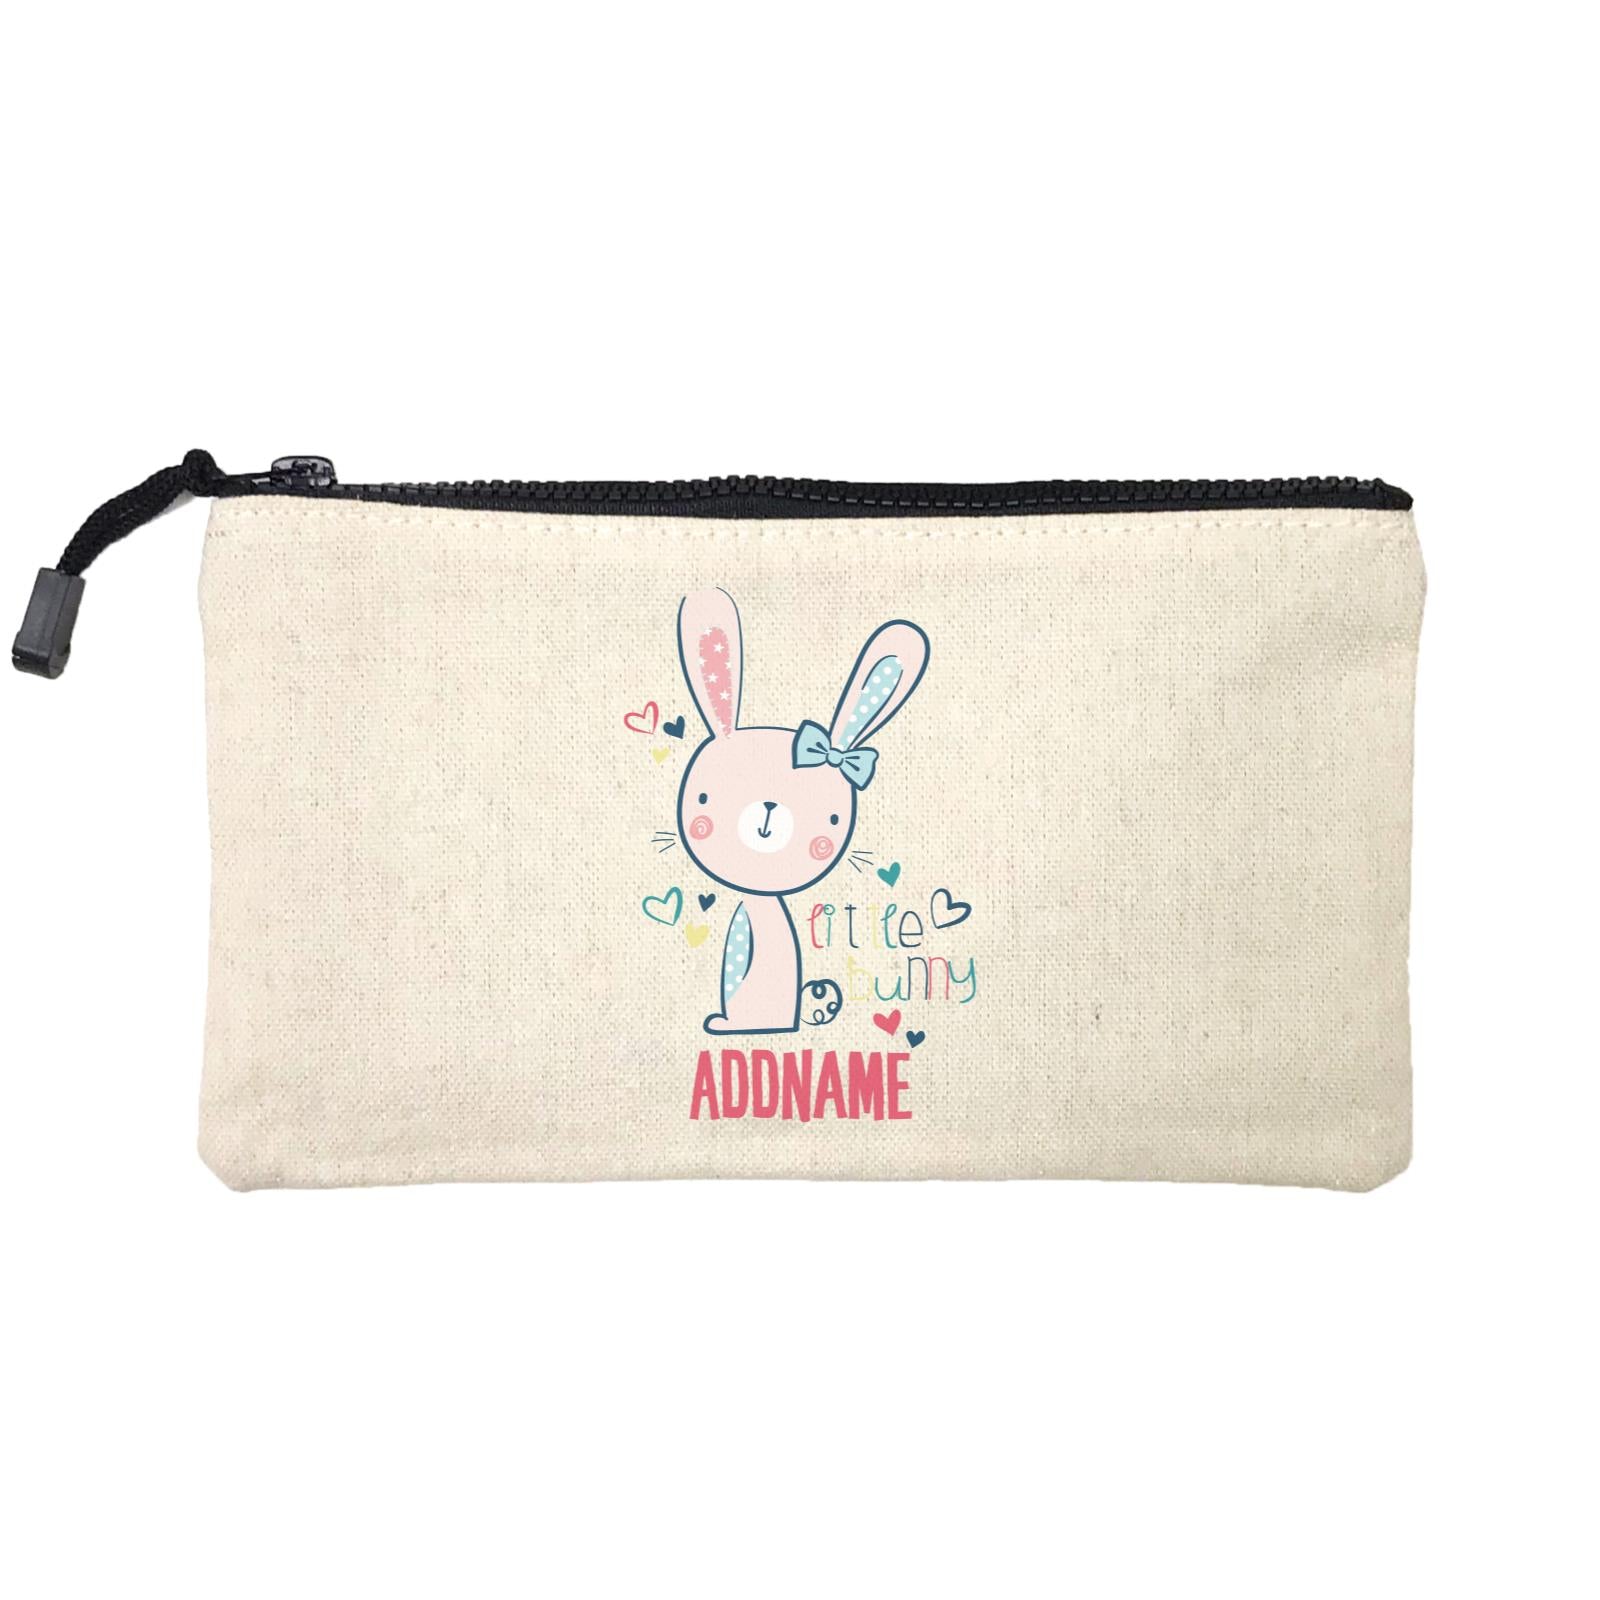 Cool Vibrant Series Cute Little Bunny Addname Mini Accessories Stationery Pouch